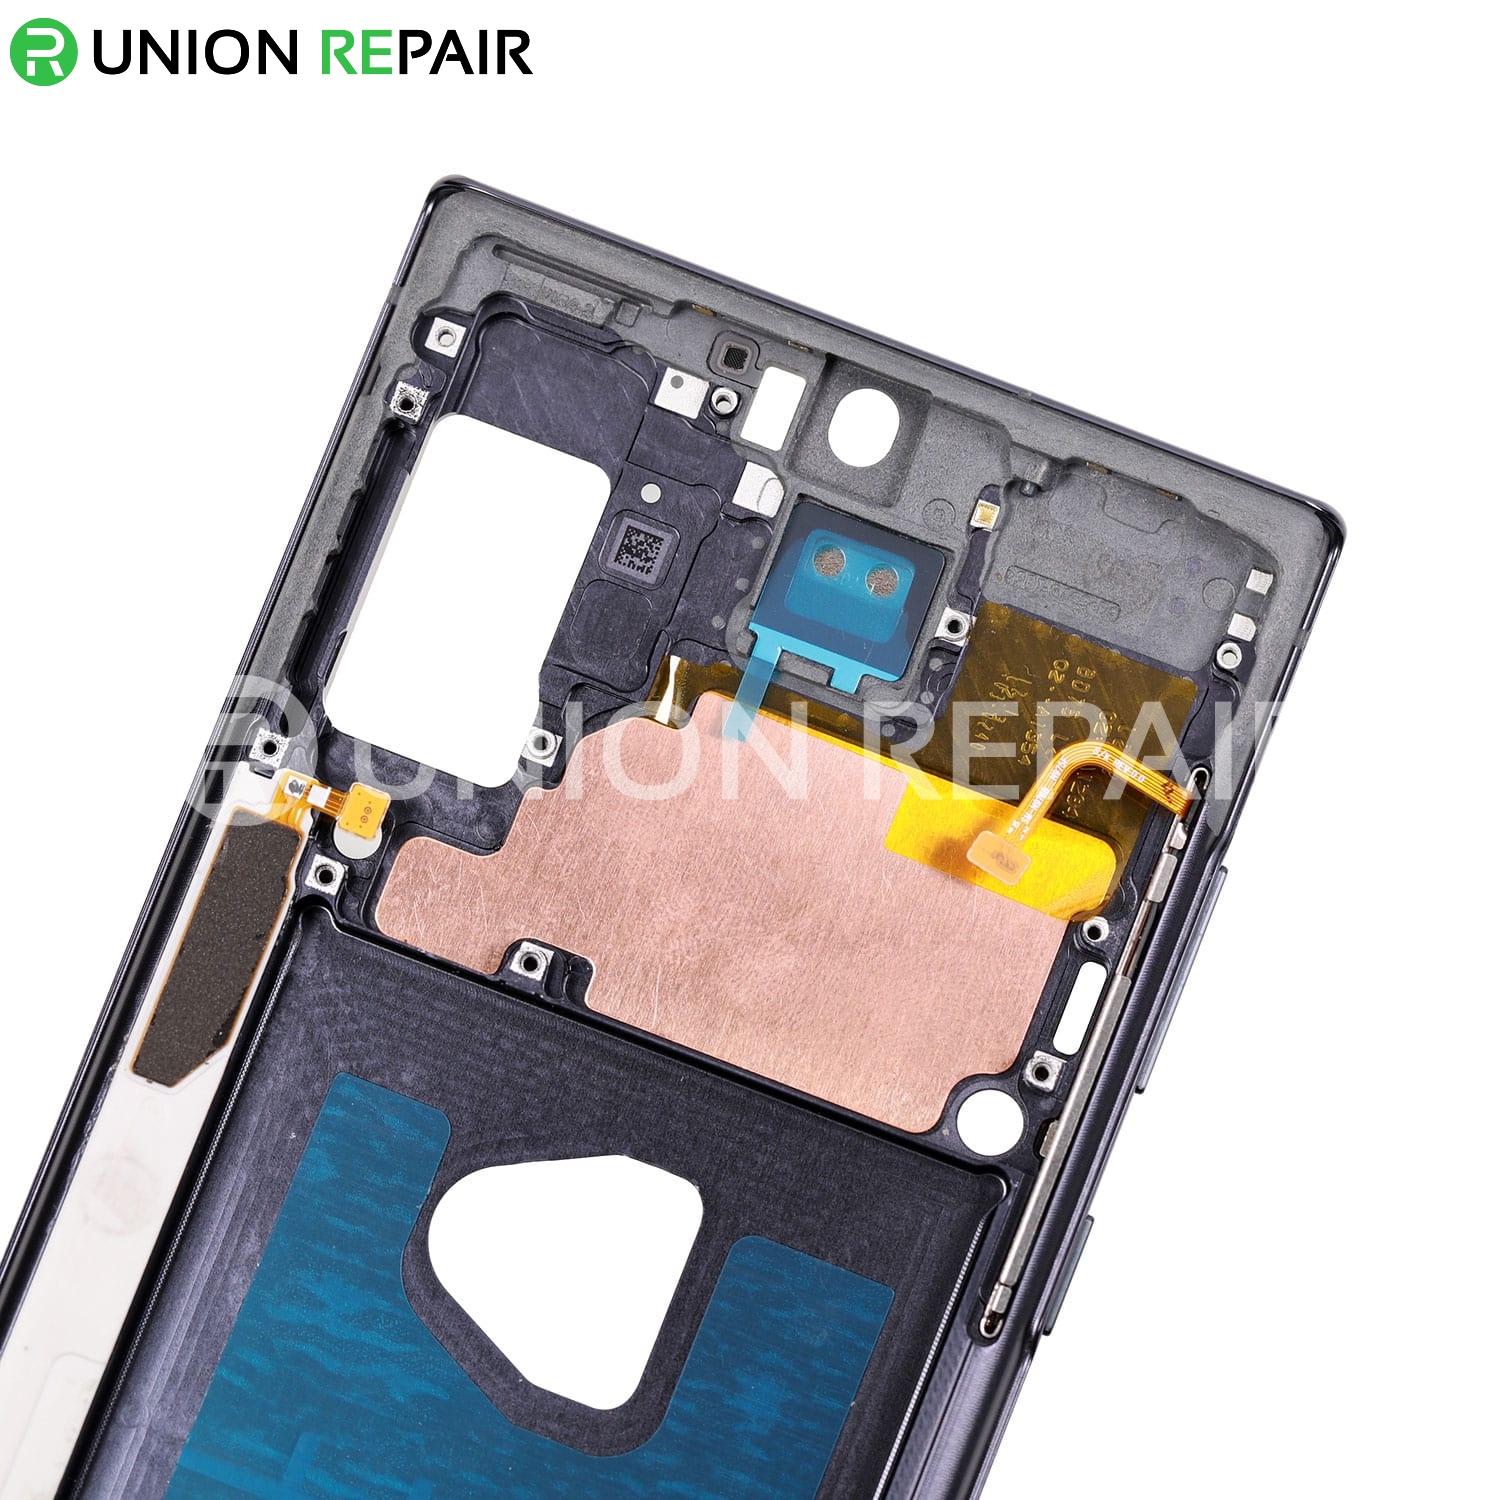 Replacement for Samsung Galaxy Note 10 Plus Rear Housing Frame - Black